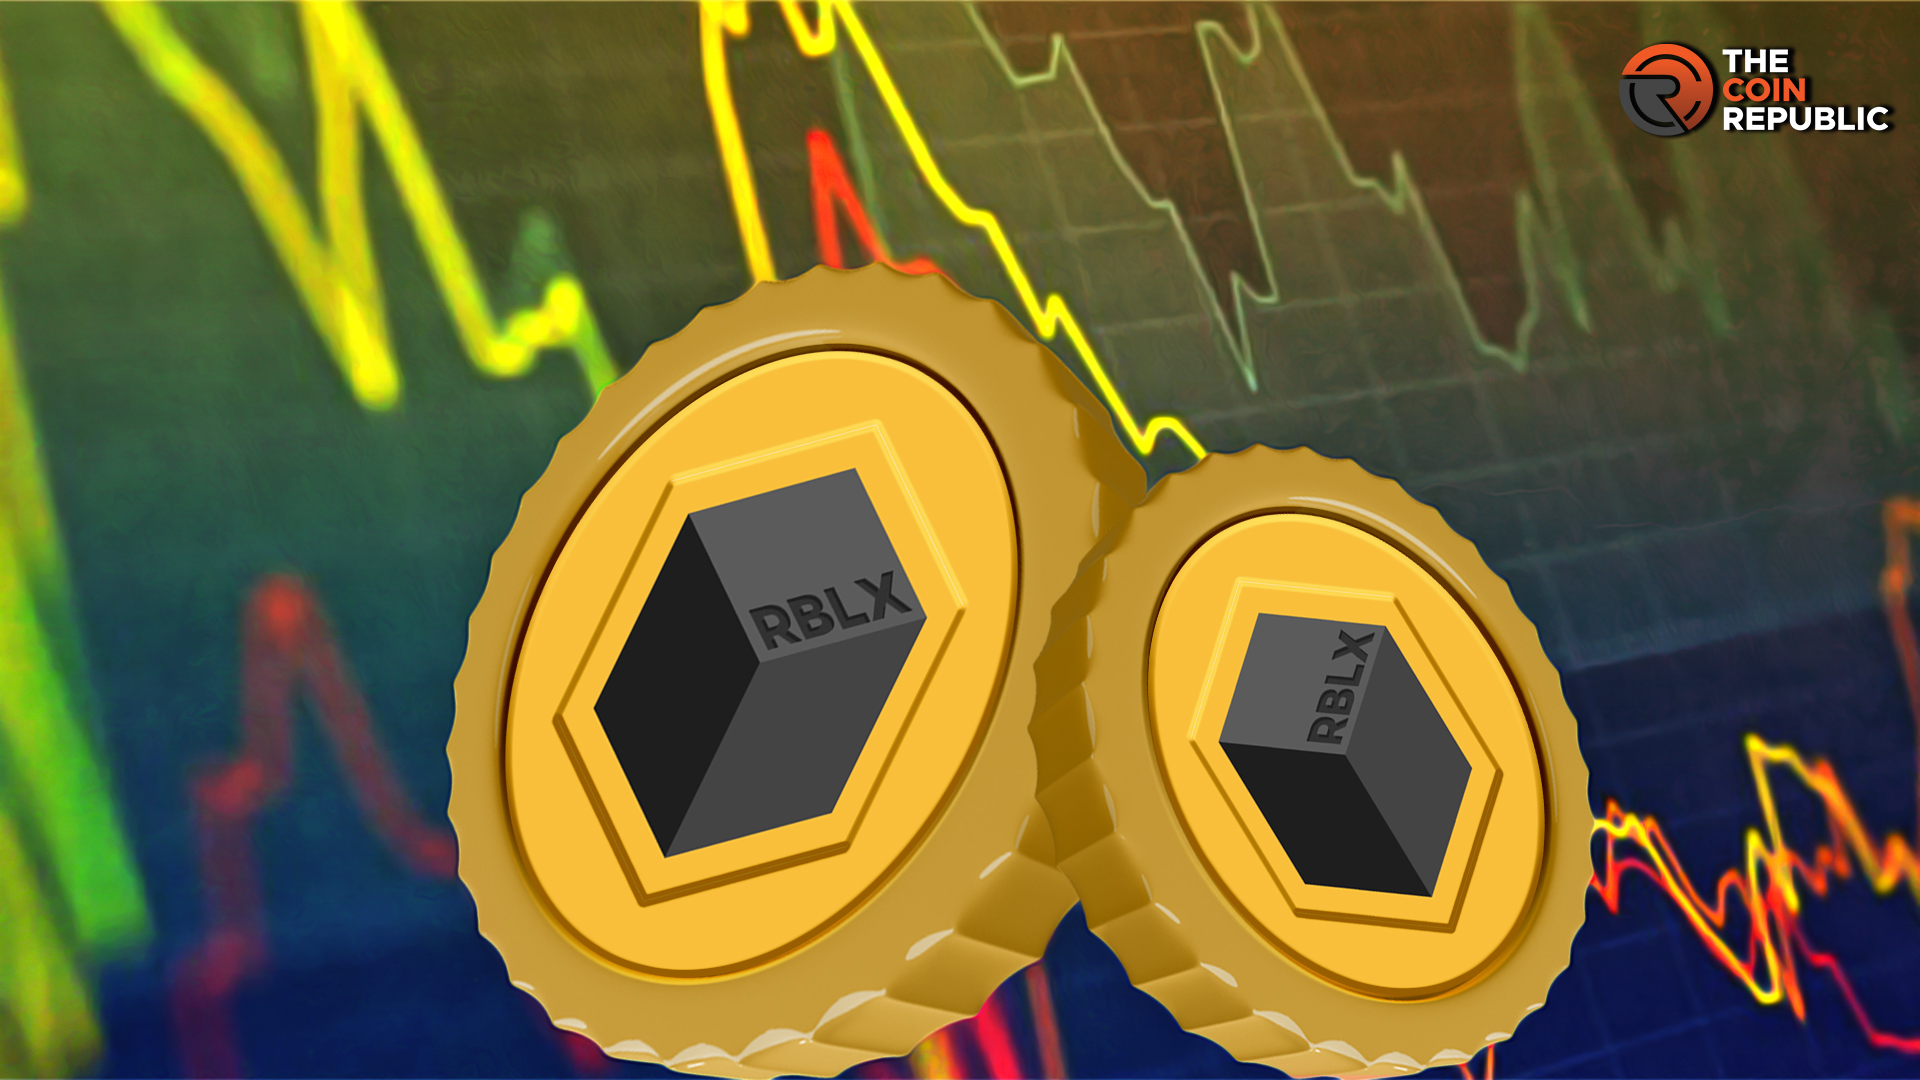 Roblox Crypto: A Challenging New Year for the RBLX Bulls